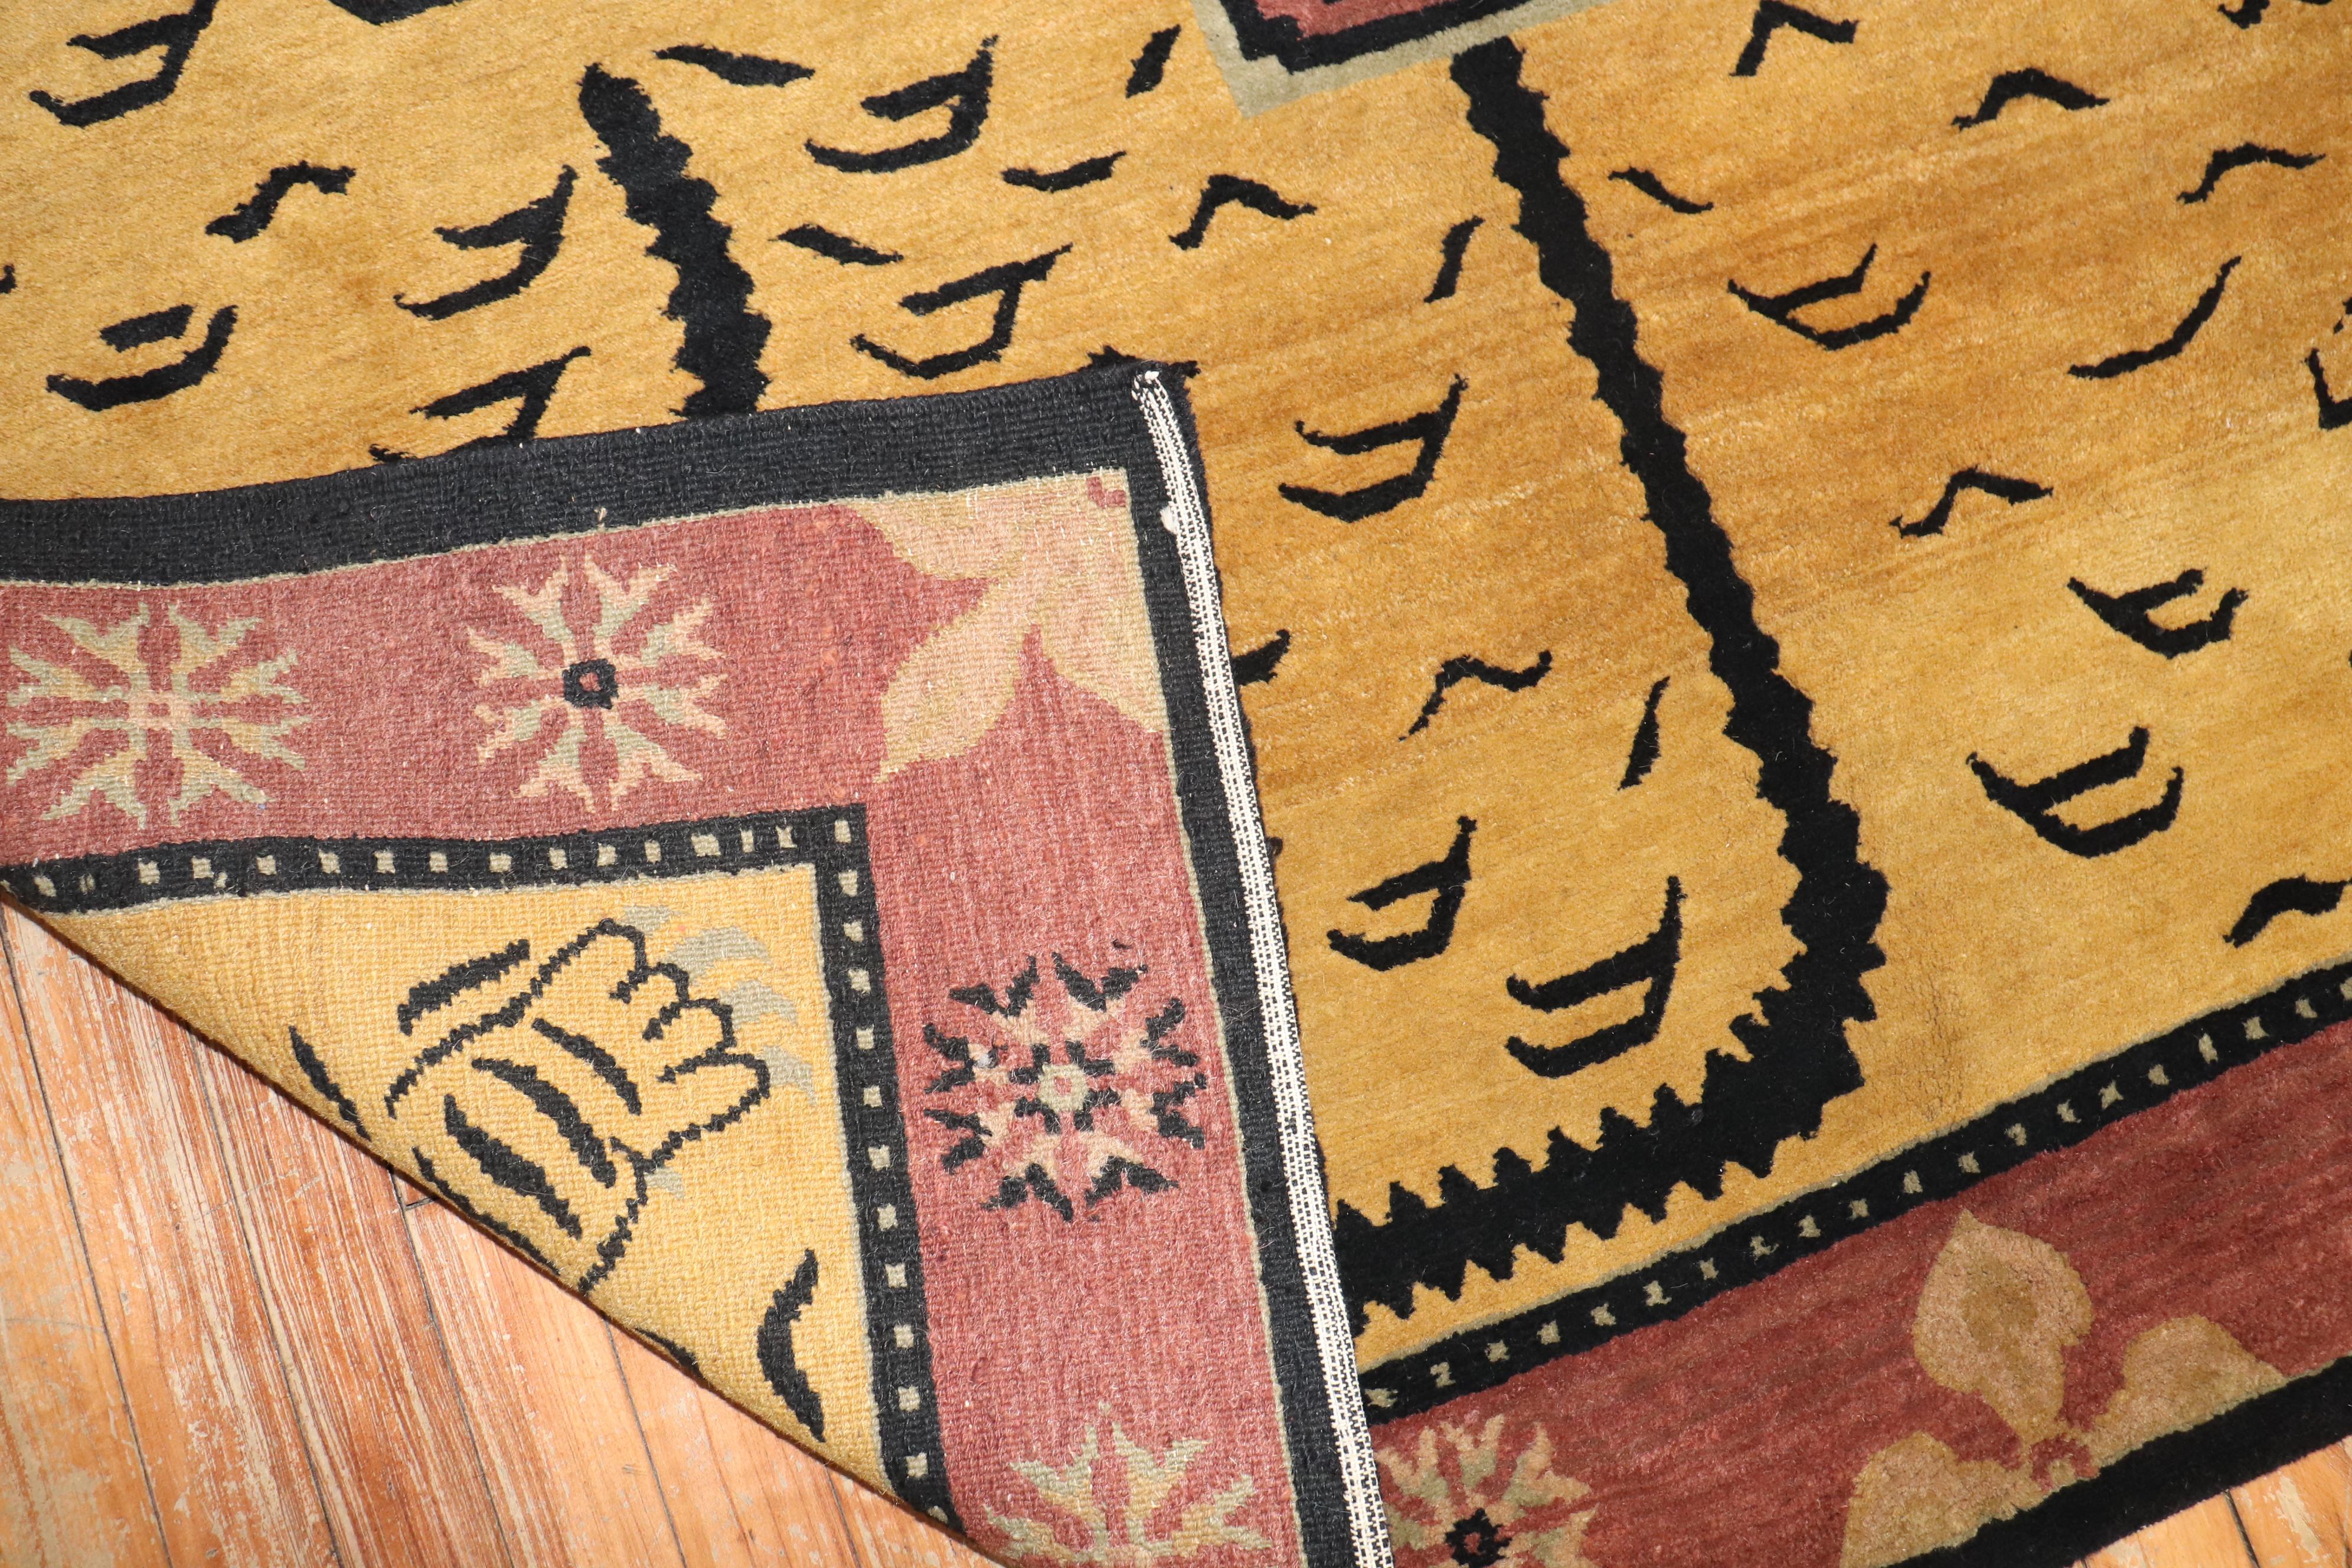 Hand-Woven 21st Century Nepalese Pictorial Rug